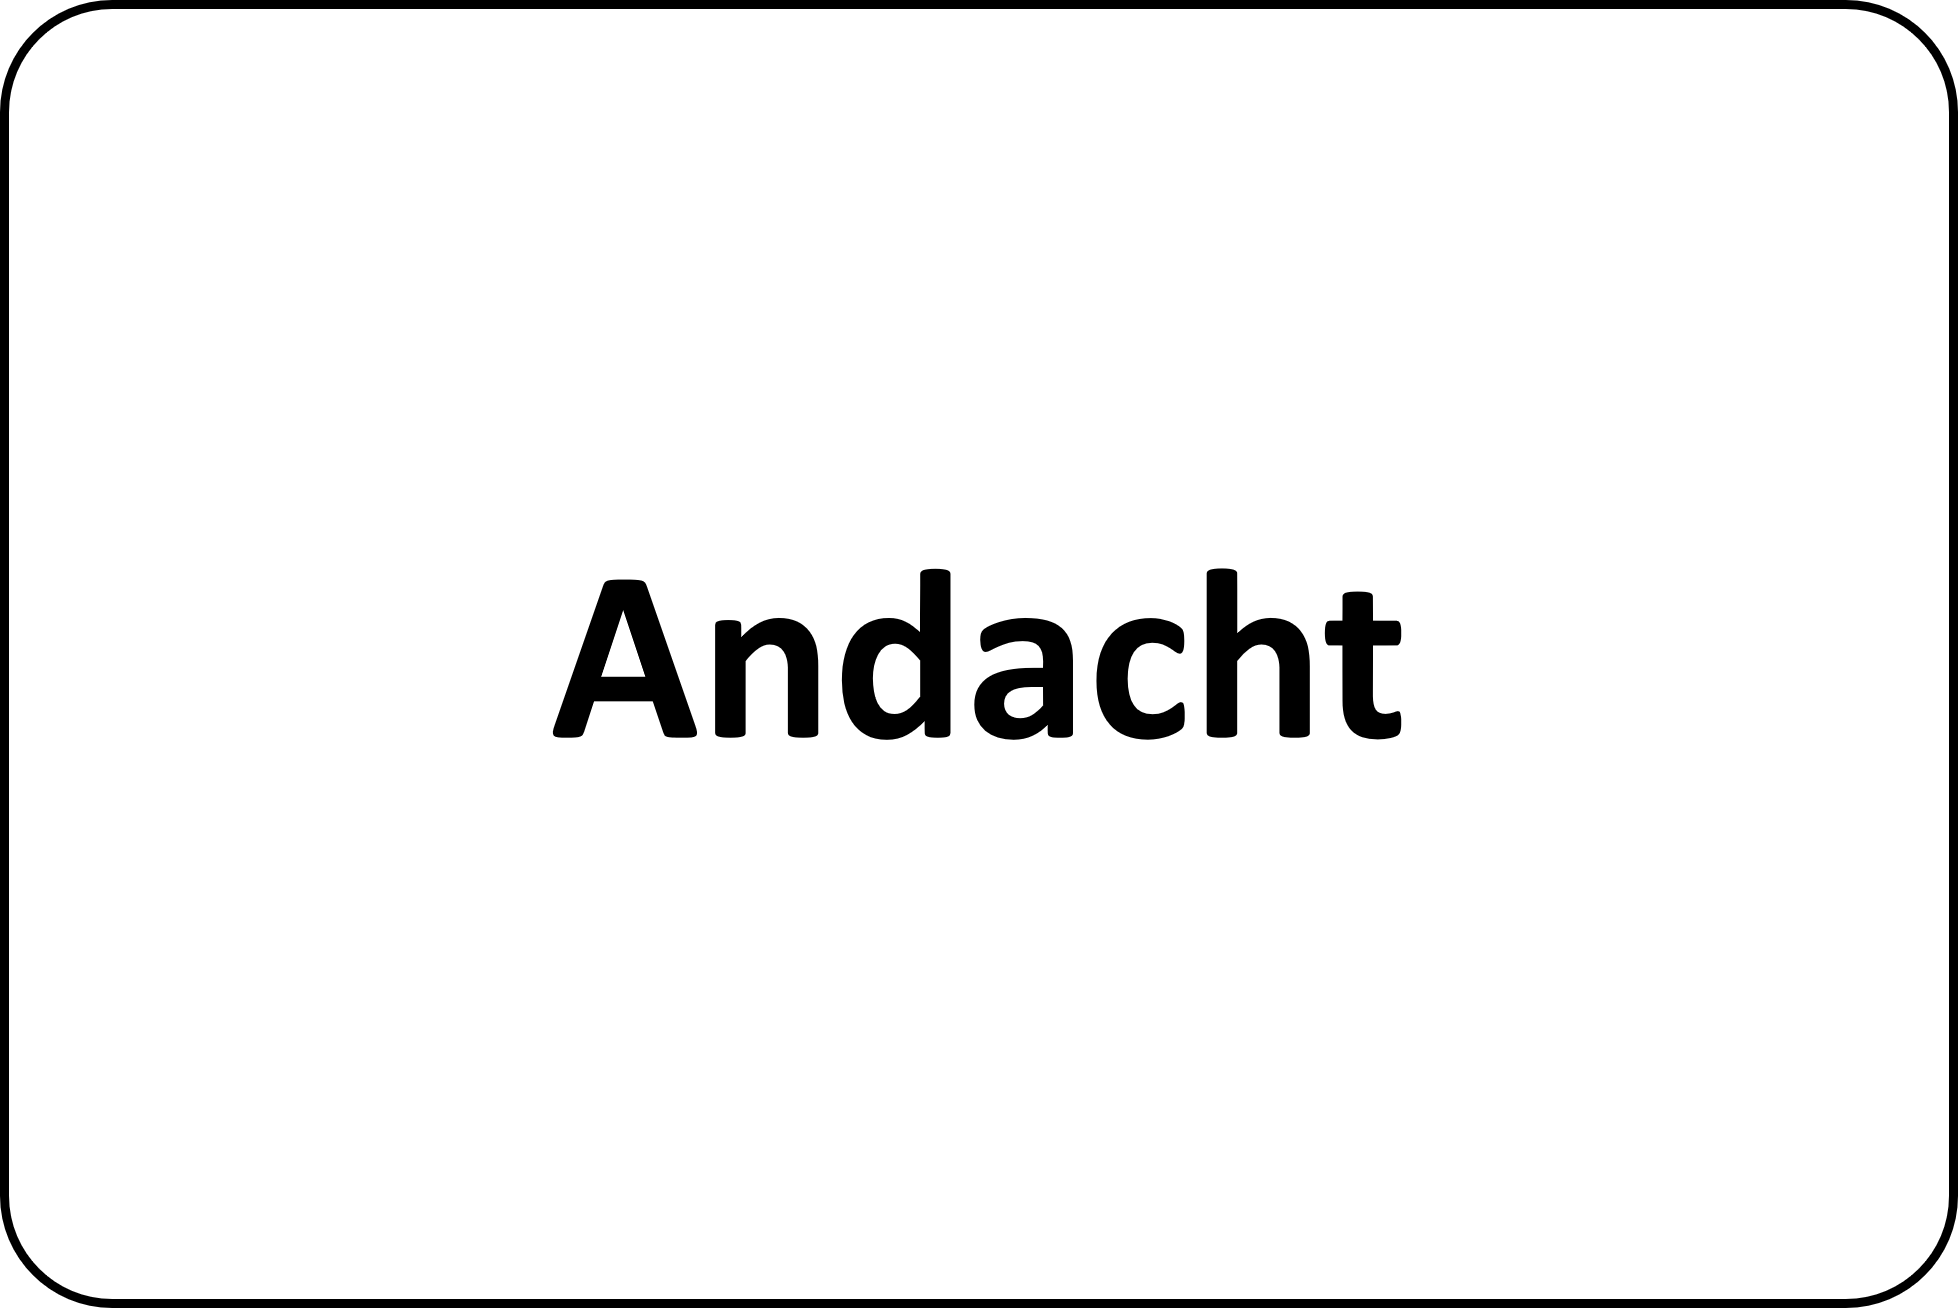 Andacht